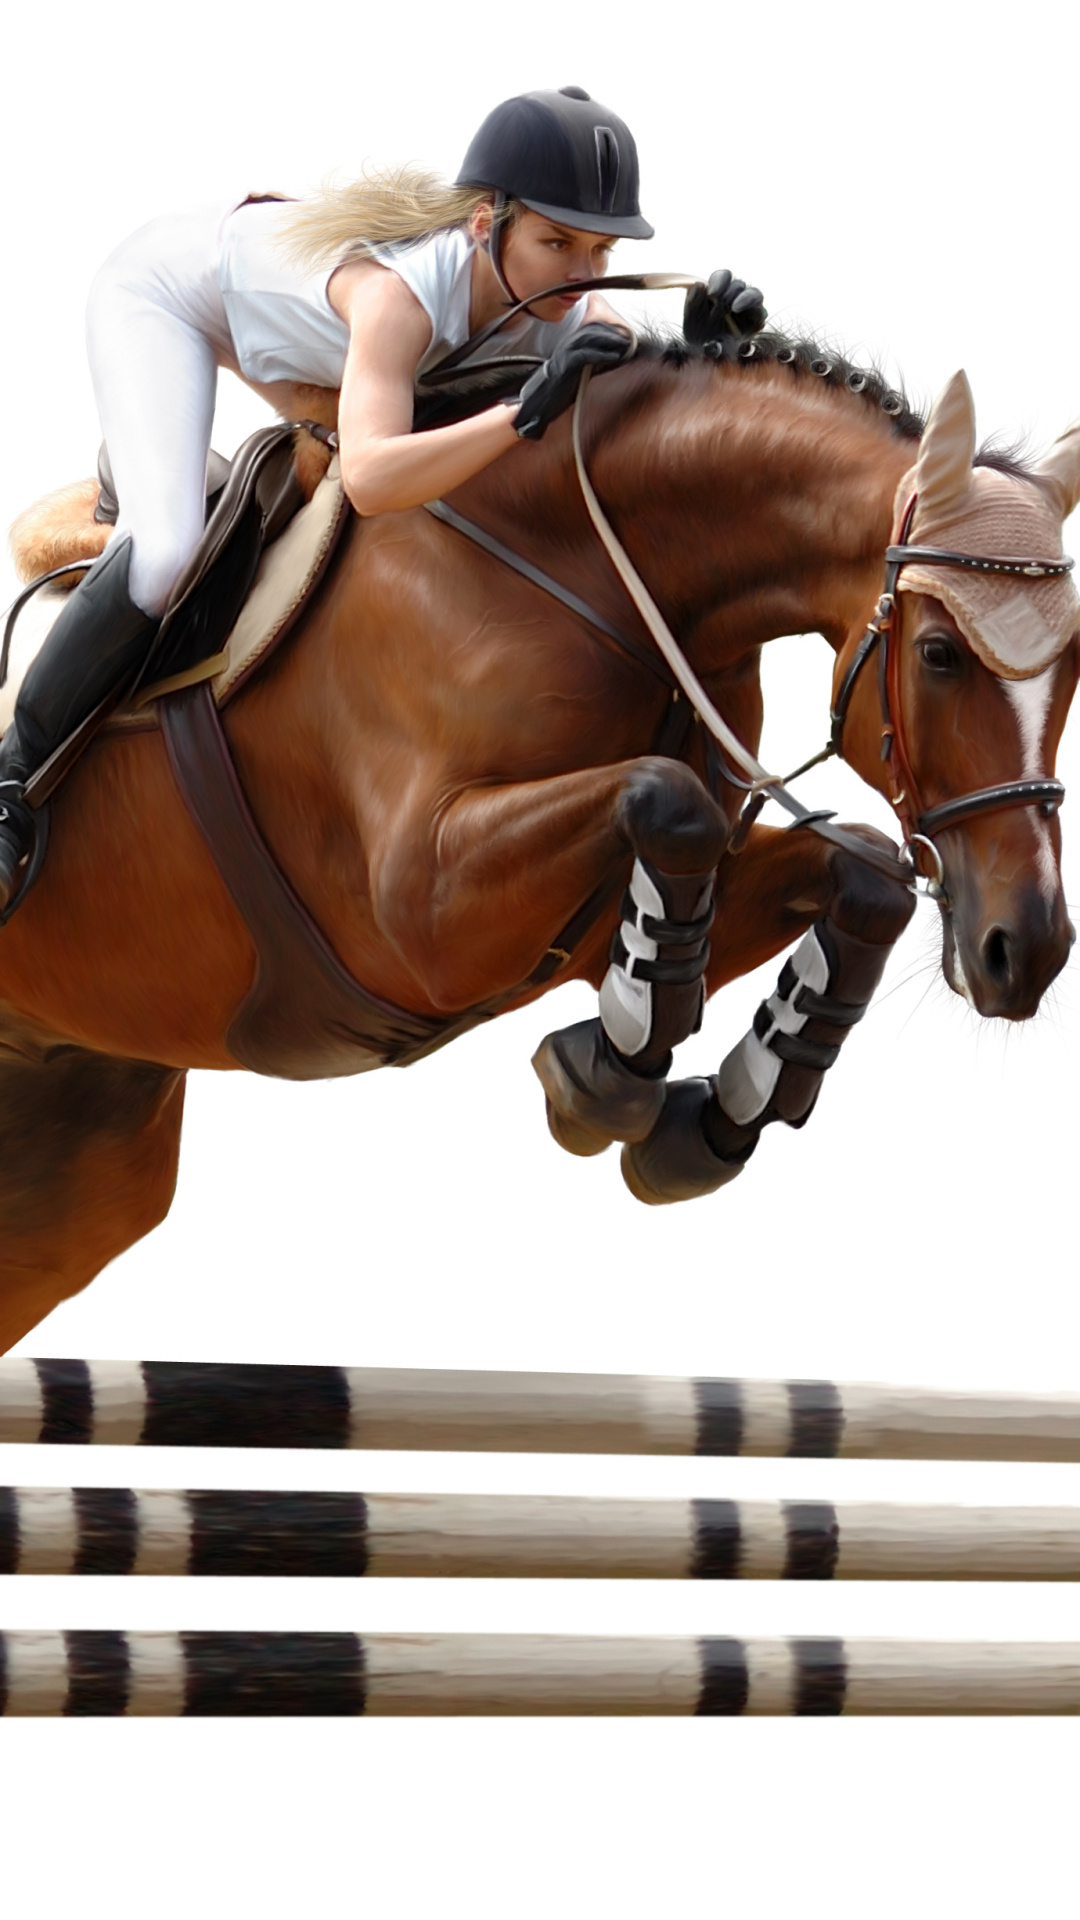 Jumping: Show Jumping, Horse, Horsewoman, Equestrianism, Outdoor sports. 1080x1920 Full HD Background.